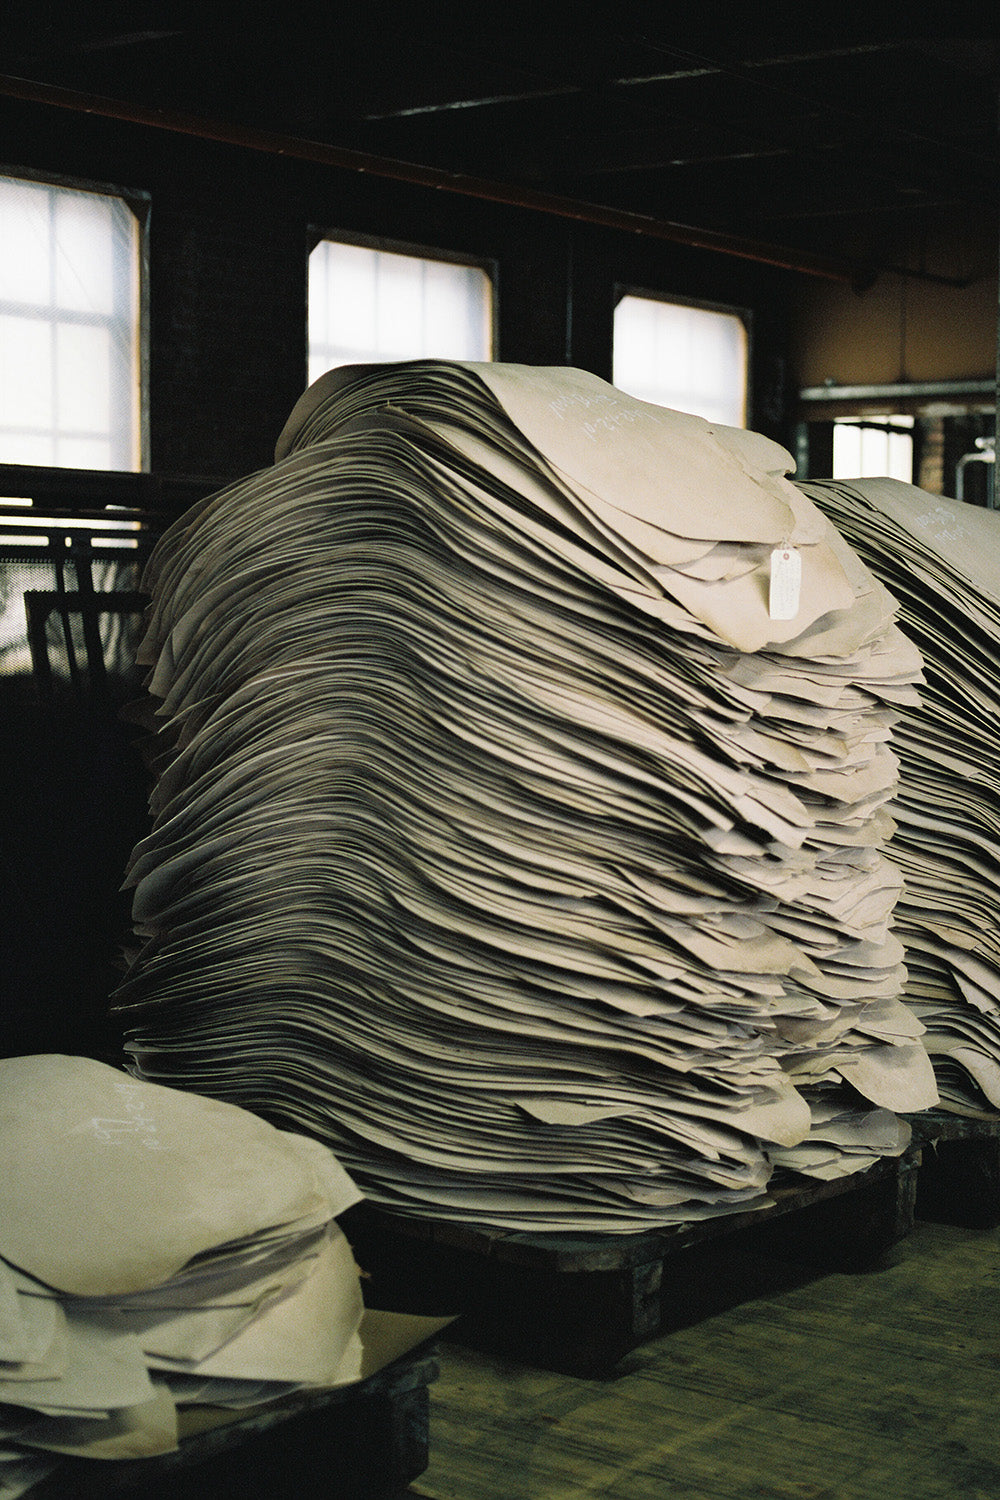 Untanned leather hides lay in large piles.